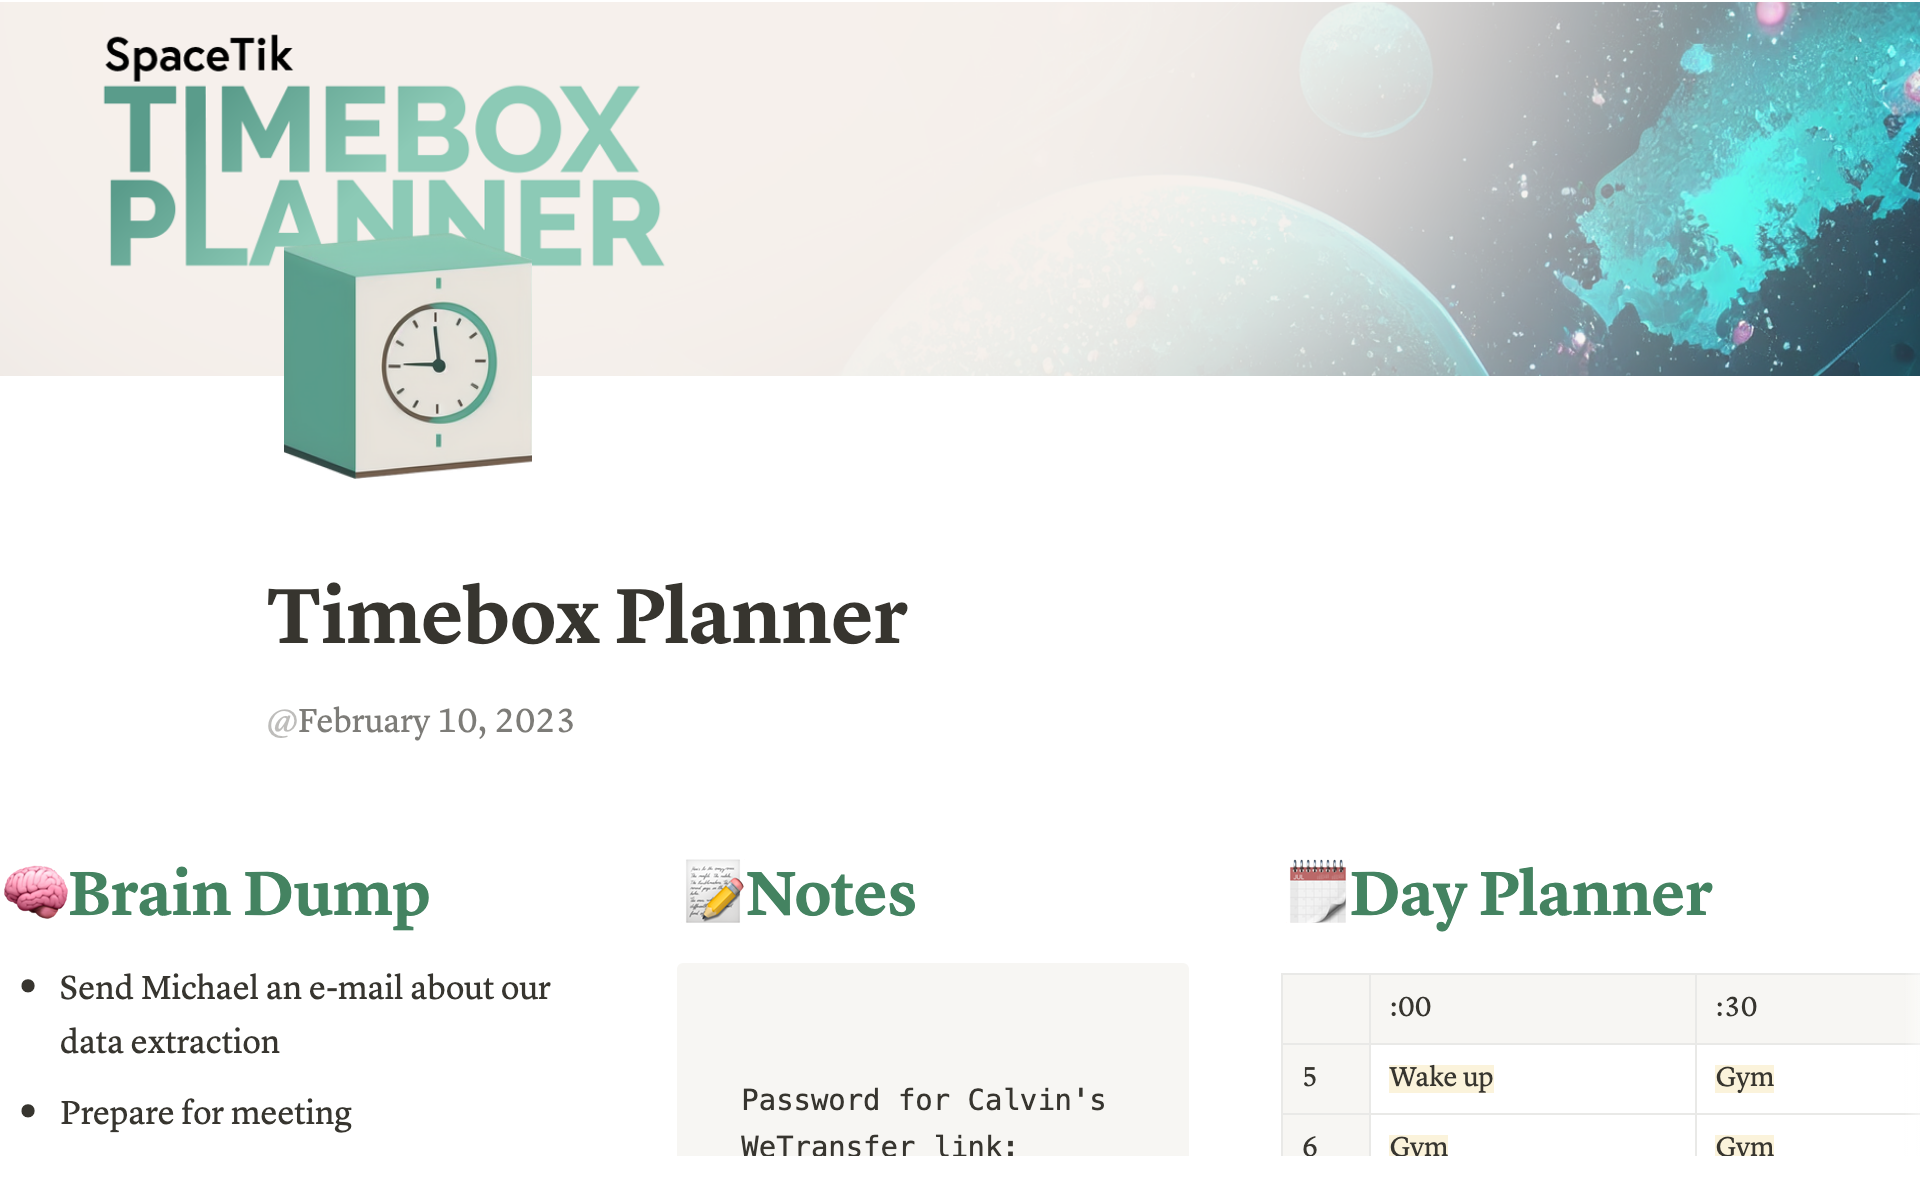 This template takes all the guess work out of staying productive and on top of your tasks with its brain dump, priority list, notes, and day planner sections.